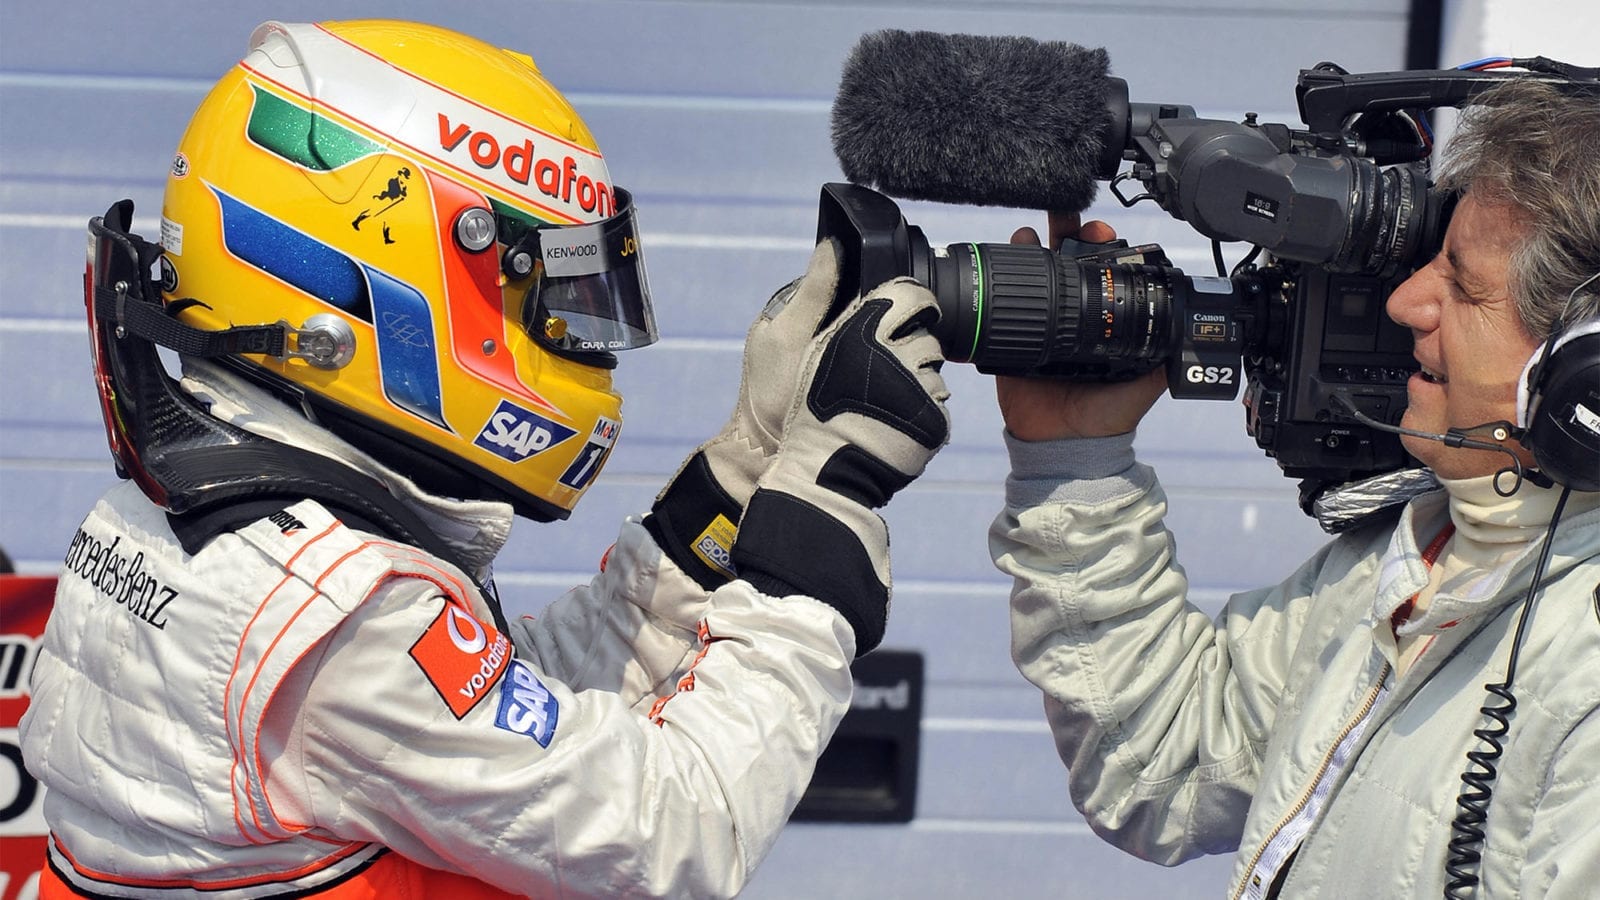 McLaren Mercedes' British driver Lewis Hamilton celebrates with a cameraman in the parc ferme of the Hungaroring racetrack on August 2, 2008 in Budapest after the qualifying session of the Formula One Hungarian Grand Prix. McLaren Mercedes' British driver Lewis Hamilton took the pole position ahead of his Finnish team mate Heikki Kovalainen and Ferrari Brazilian's driver Felipe Massa.